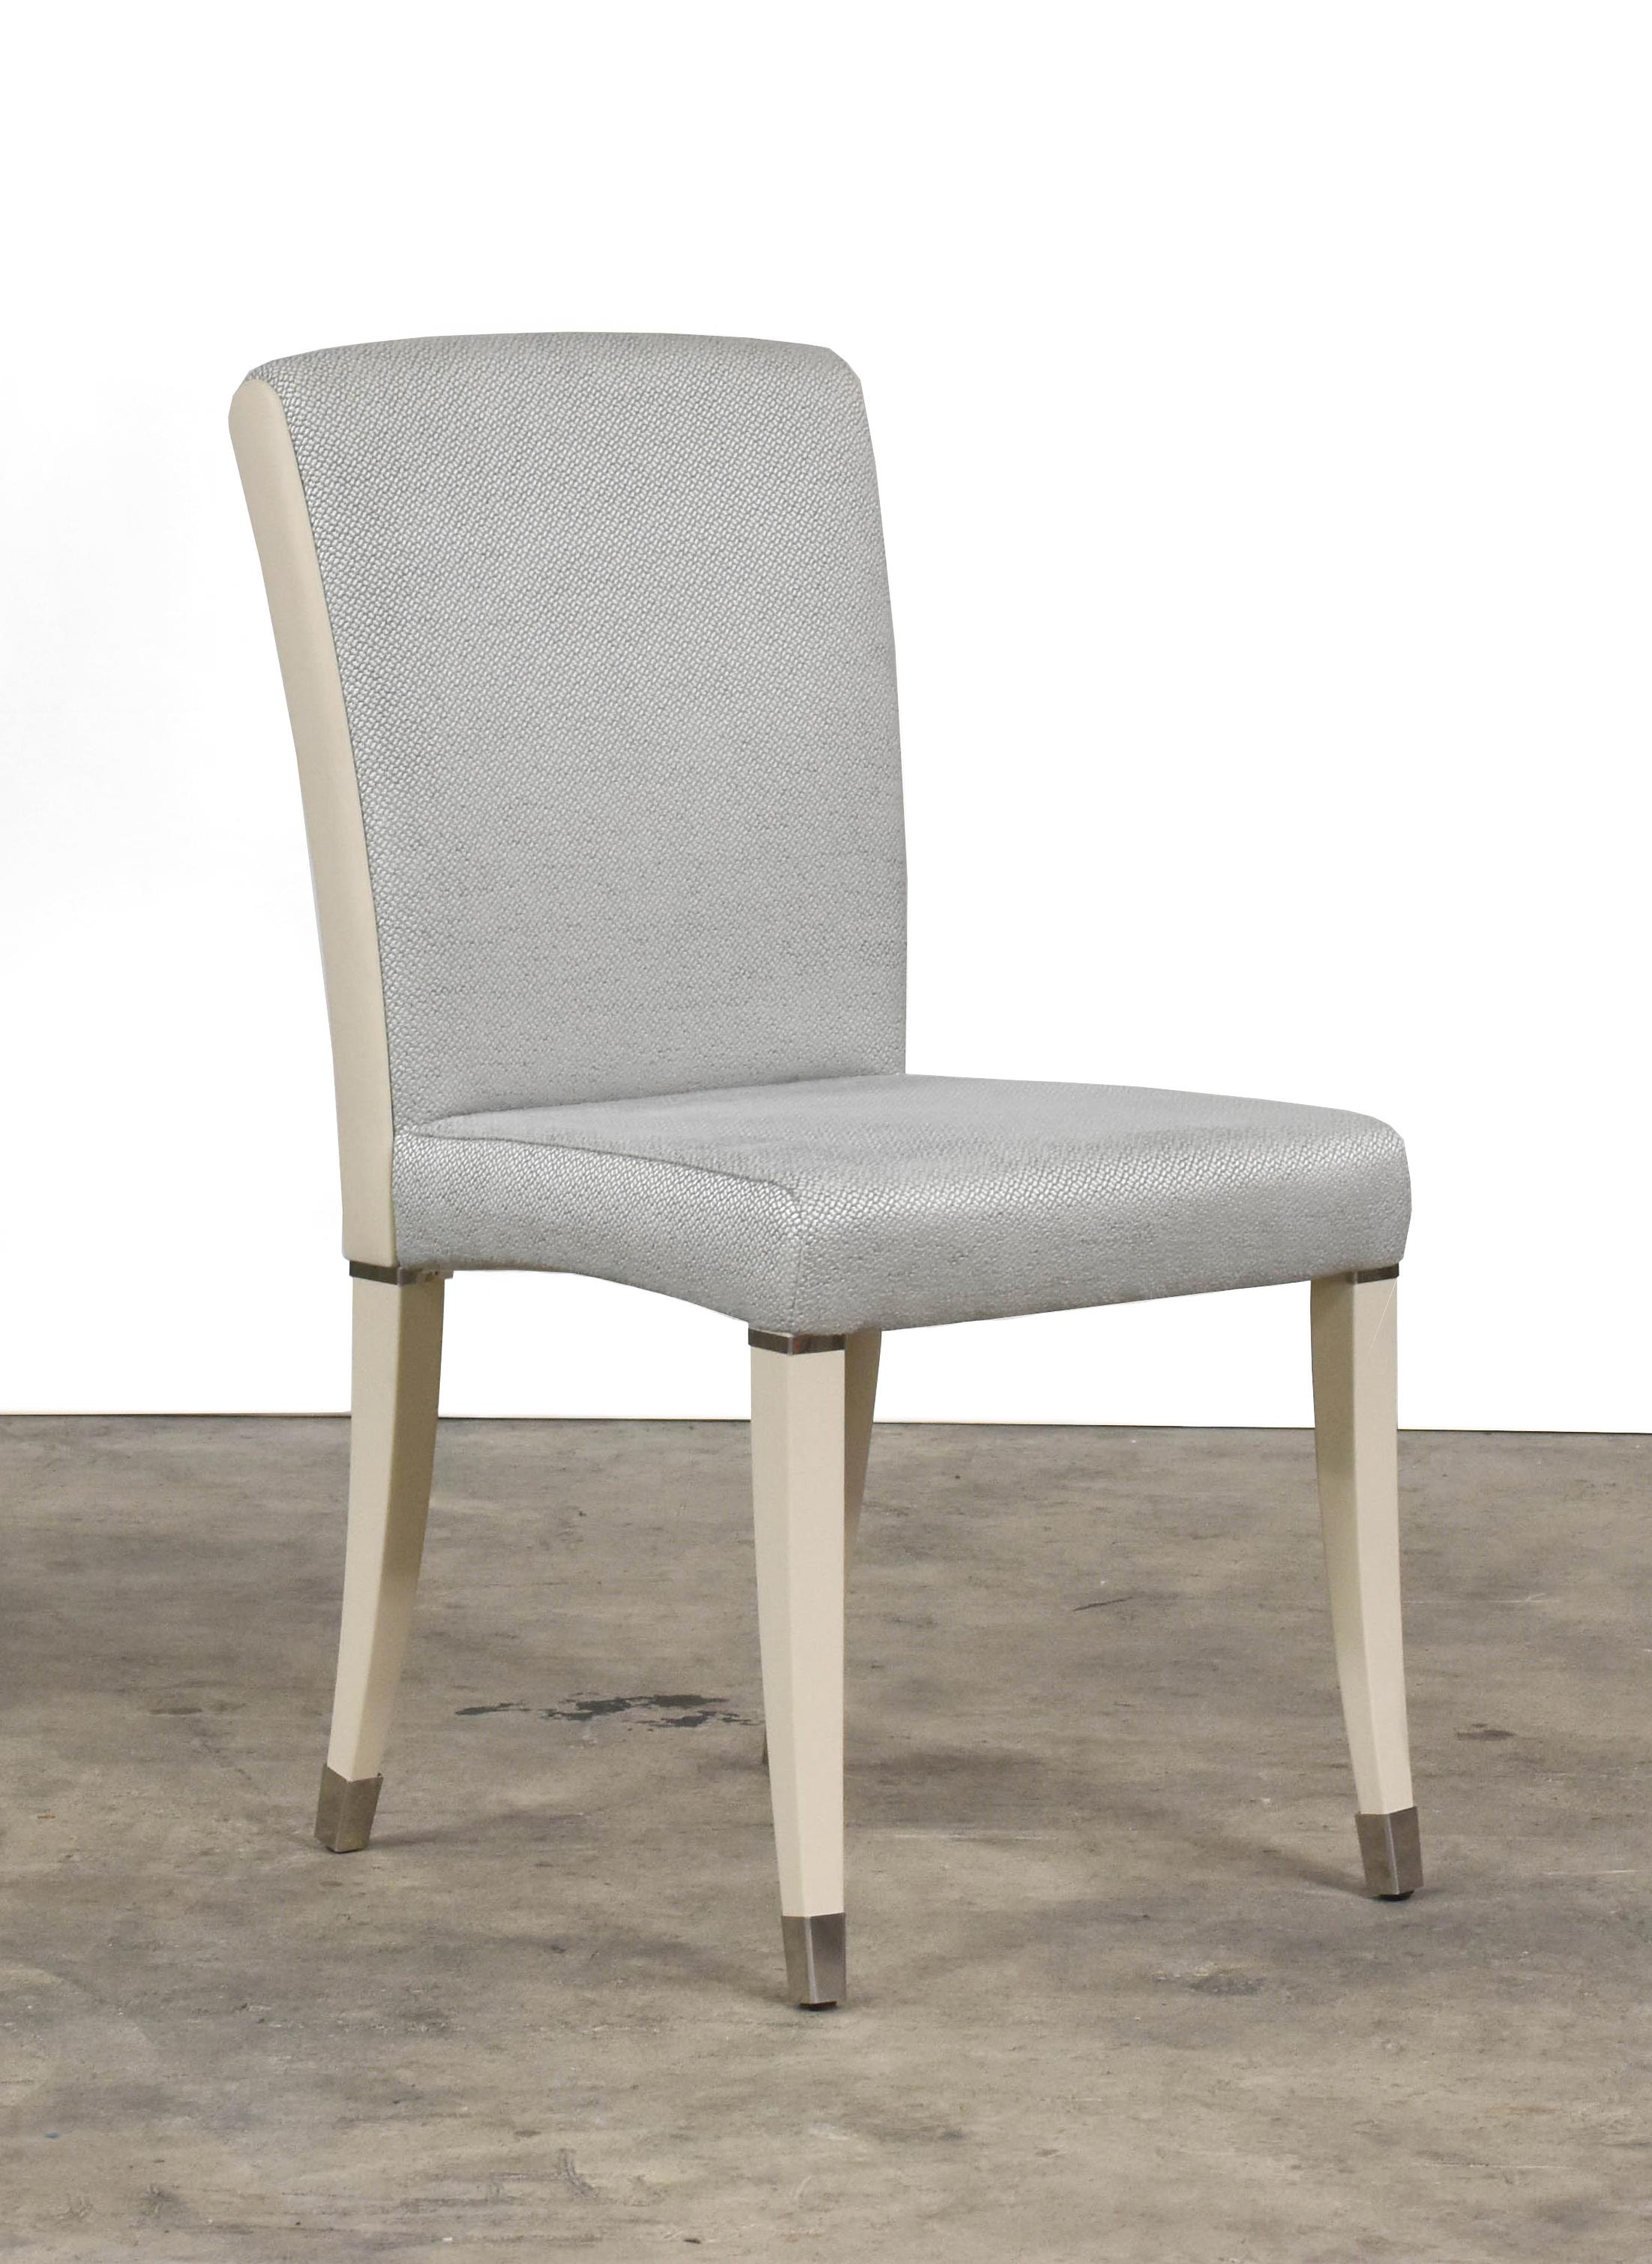 Italian Heritage Collection Aline Chair For Sale